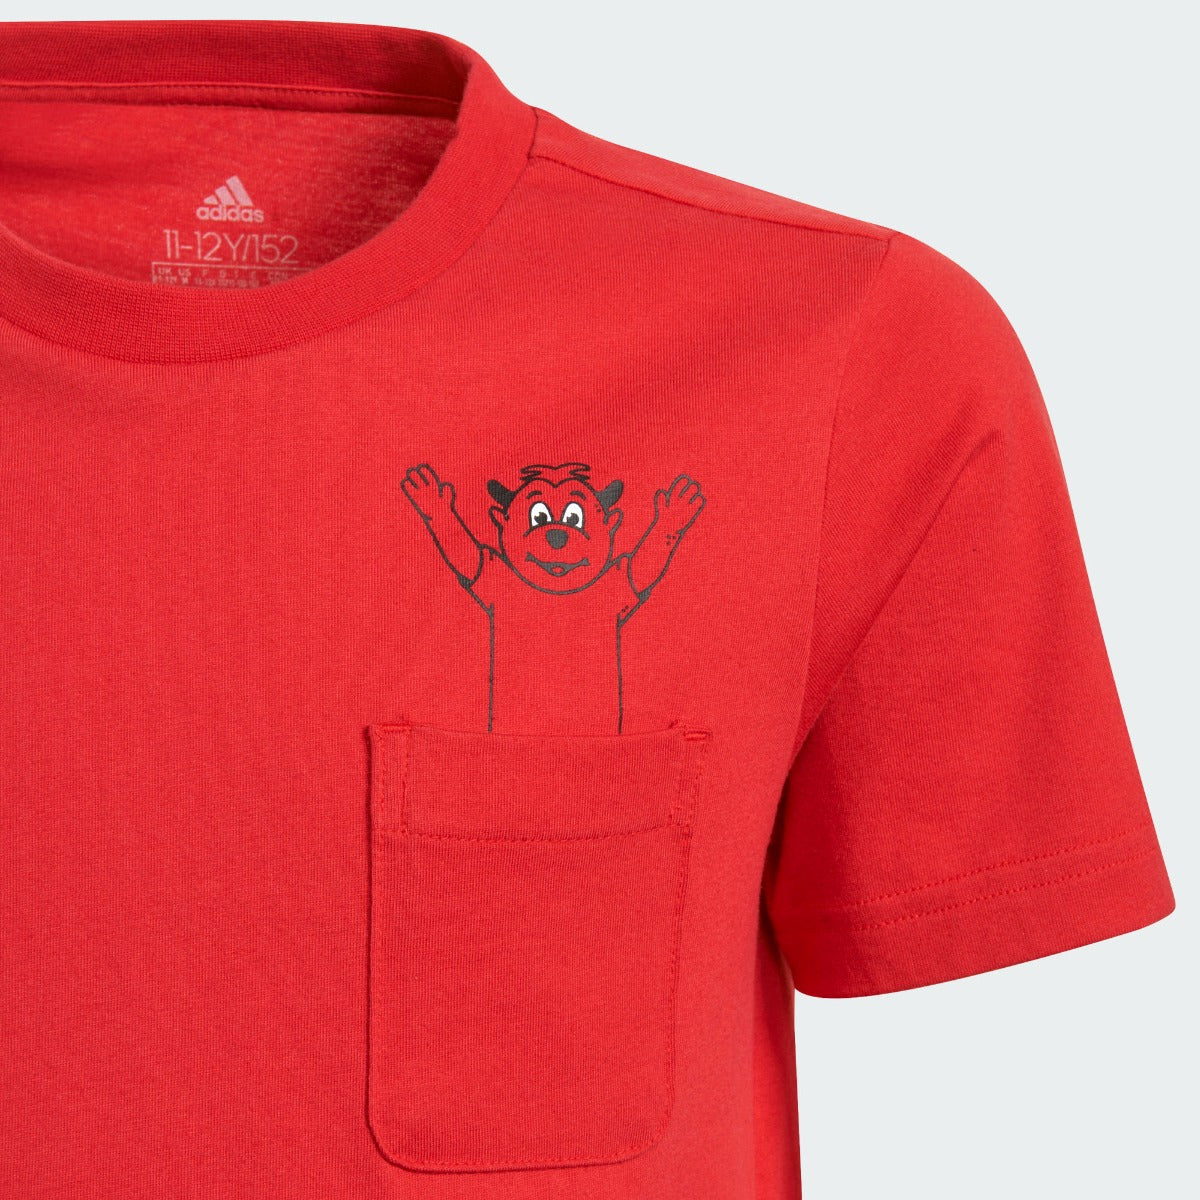 Adidas 2021-22 Manchester United Youth Tee - Red (Detail 1)